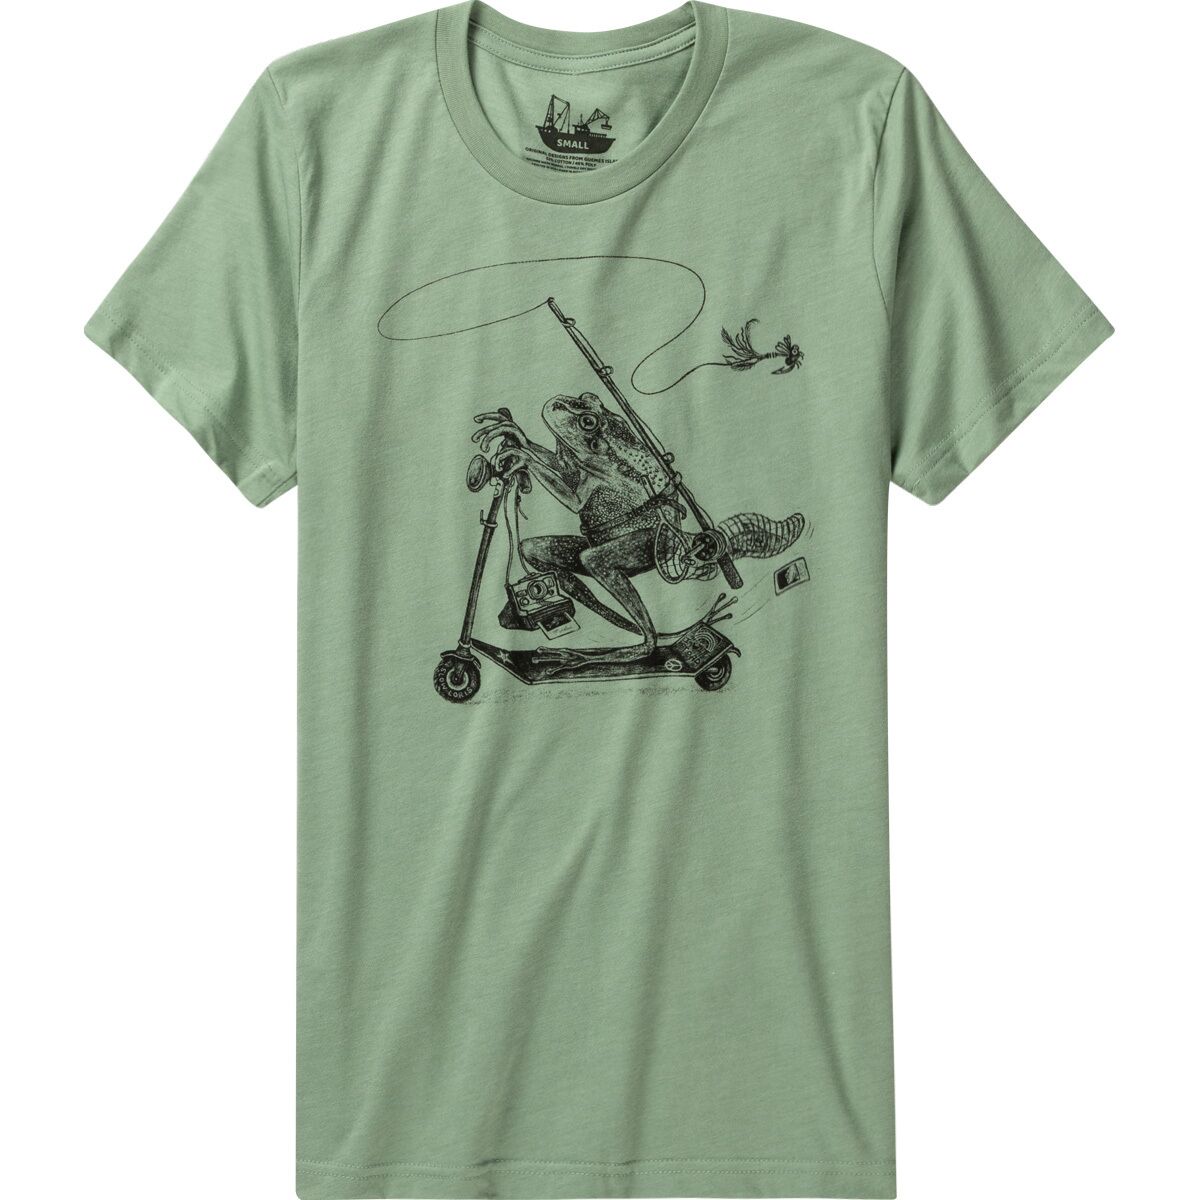 Frog on the Fly T-Shirt - Men